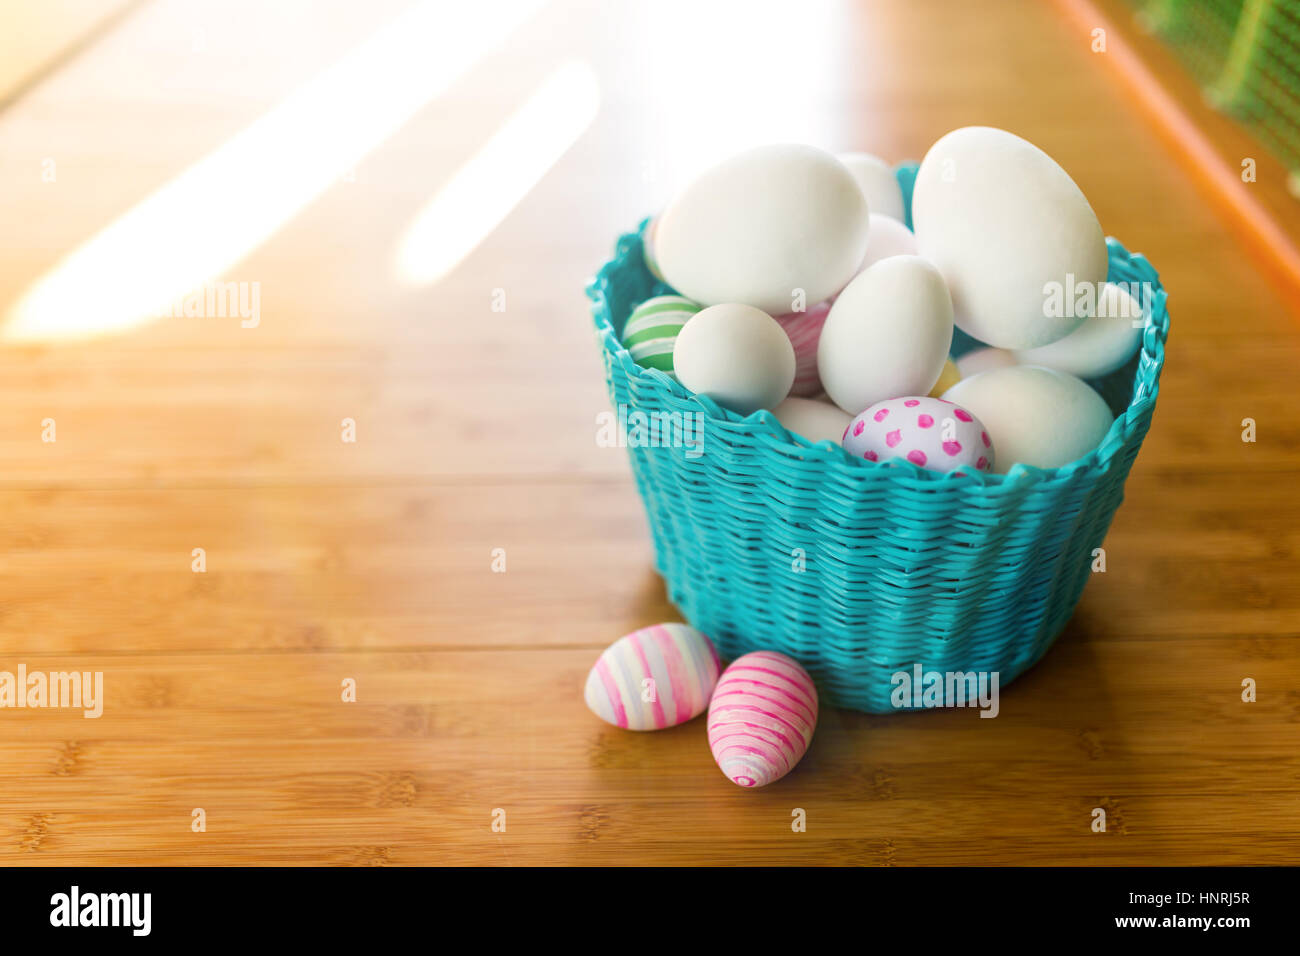 Easter basket with eggs on a wooden floor Stock Photo